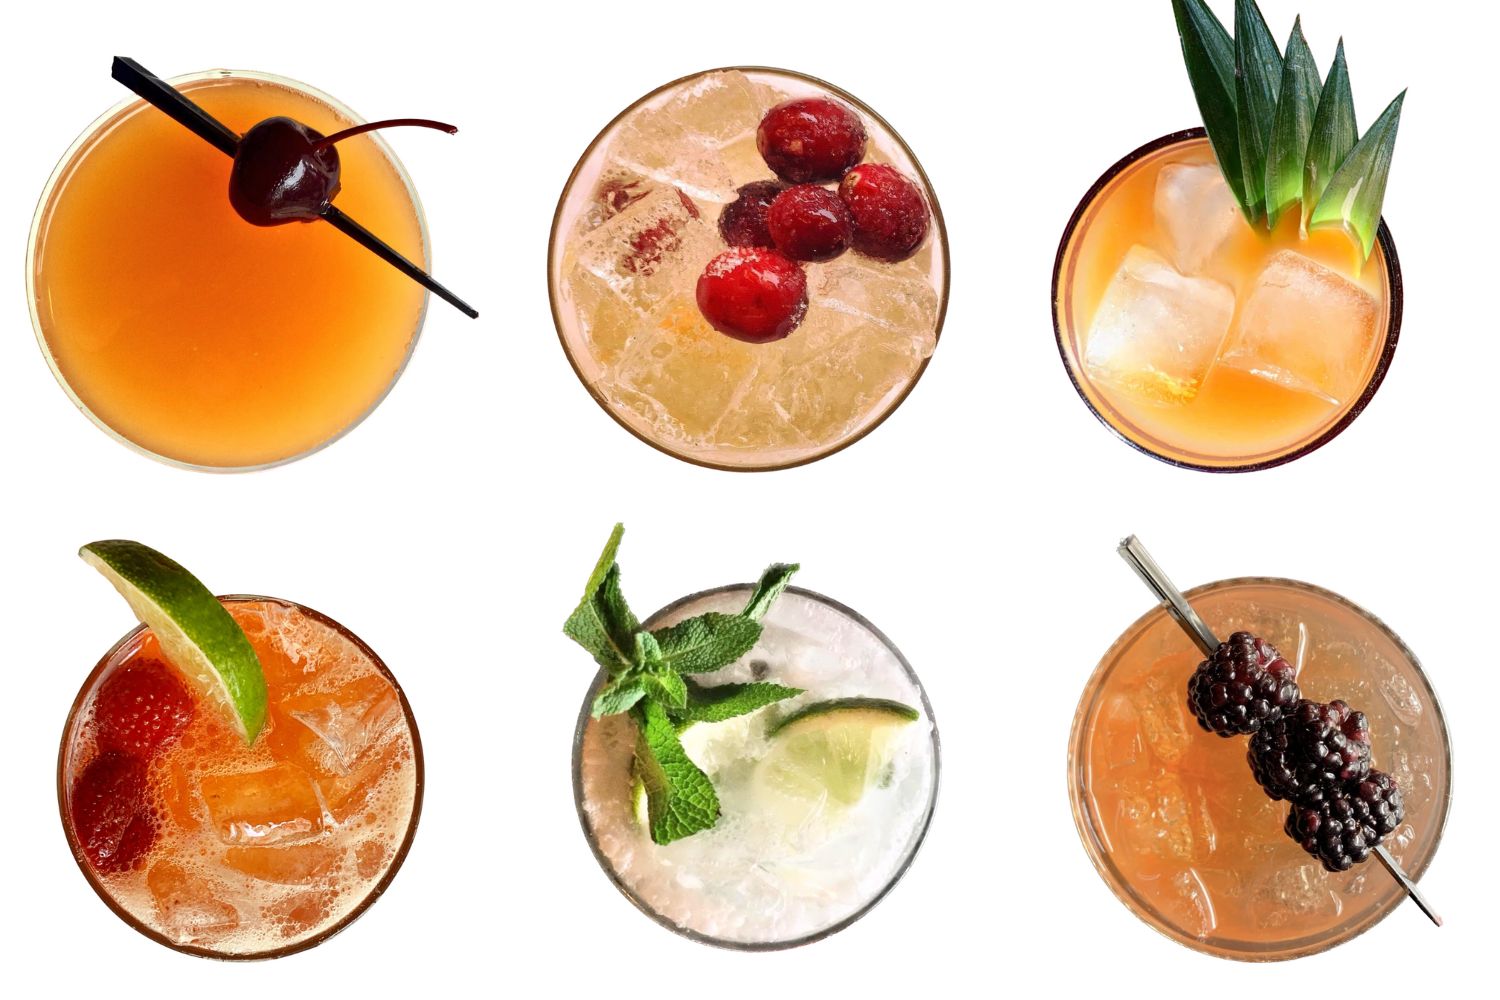 Garnishes on cocktails: Adventures in Artistic Mixology